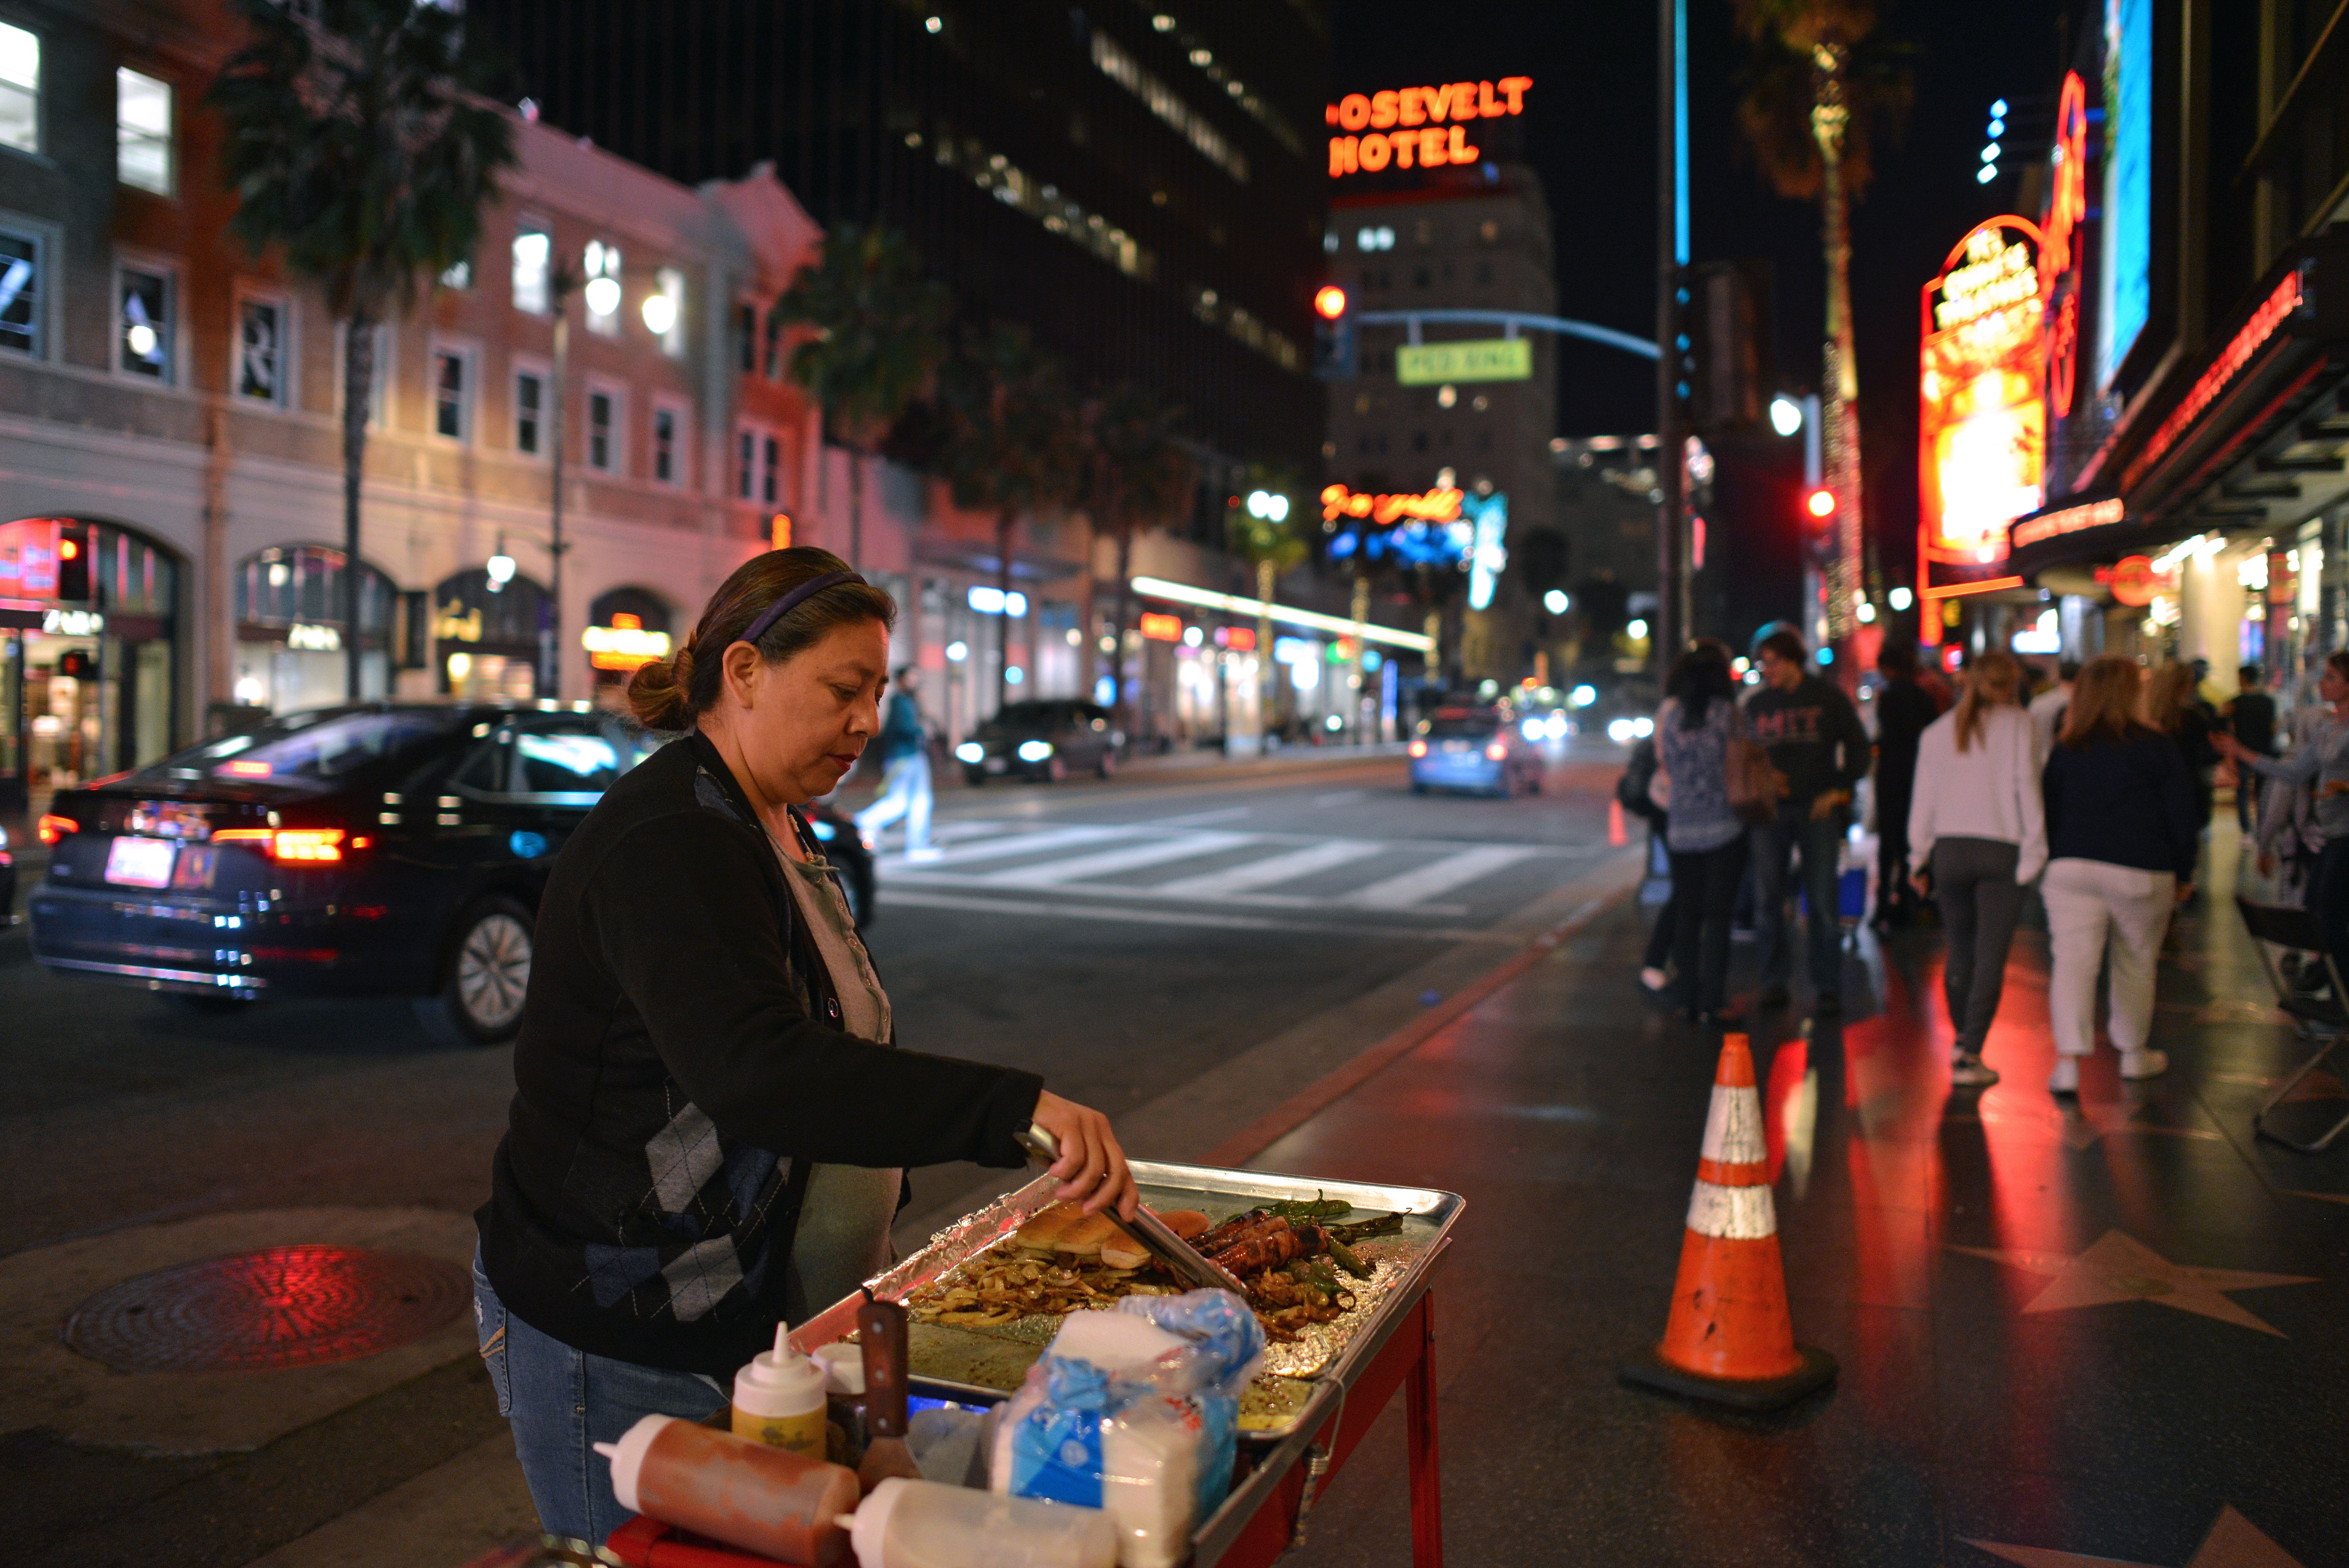 Maria Navas prepares hot dogs in front of the Dolby Theatre on the Hollywood Walk of Fame, in Los Angeles, on March 18, 2019.